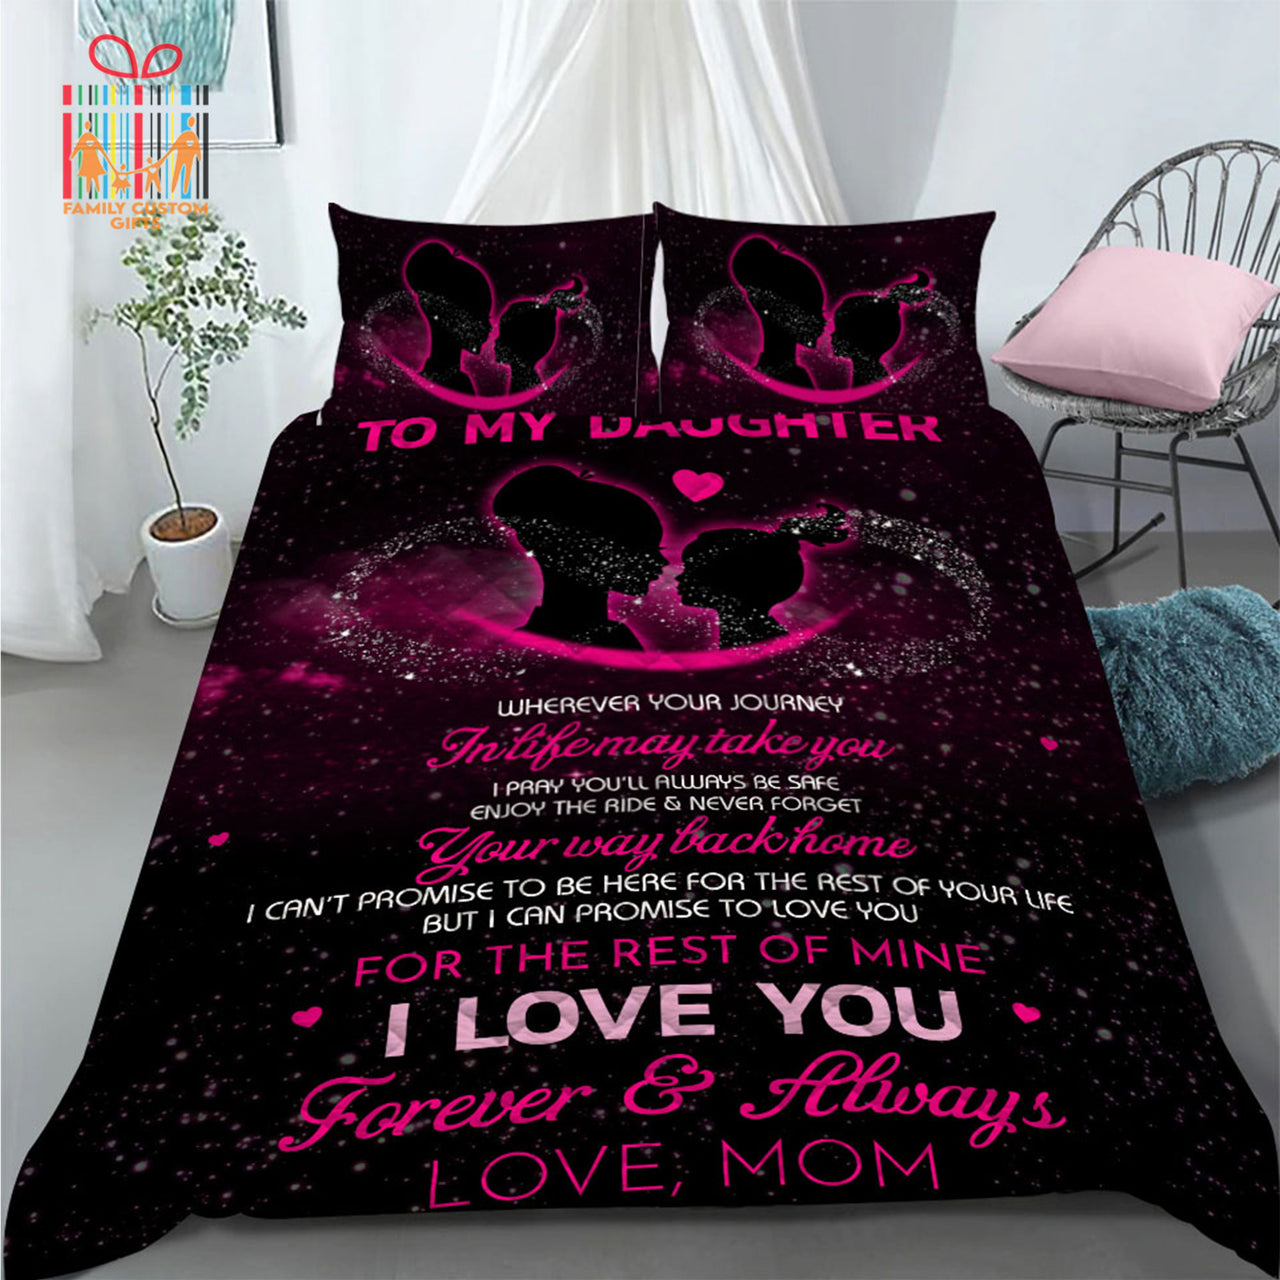 Comforter To My Daughter from Mom Custom Bedding Set for Kids Teens Adult Personalized Premium Bed Set